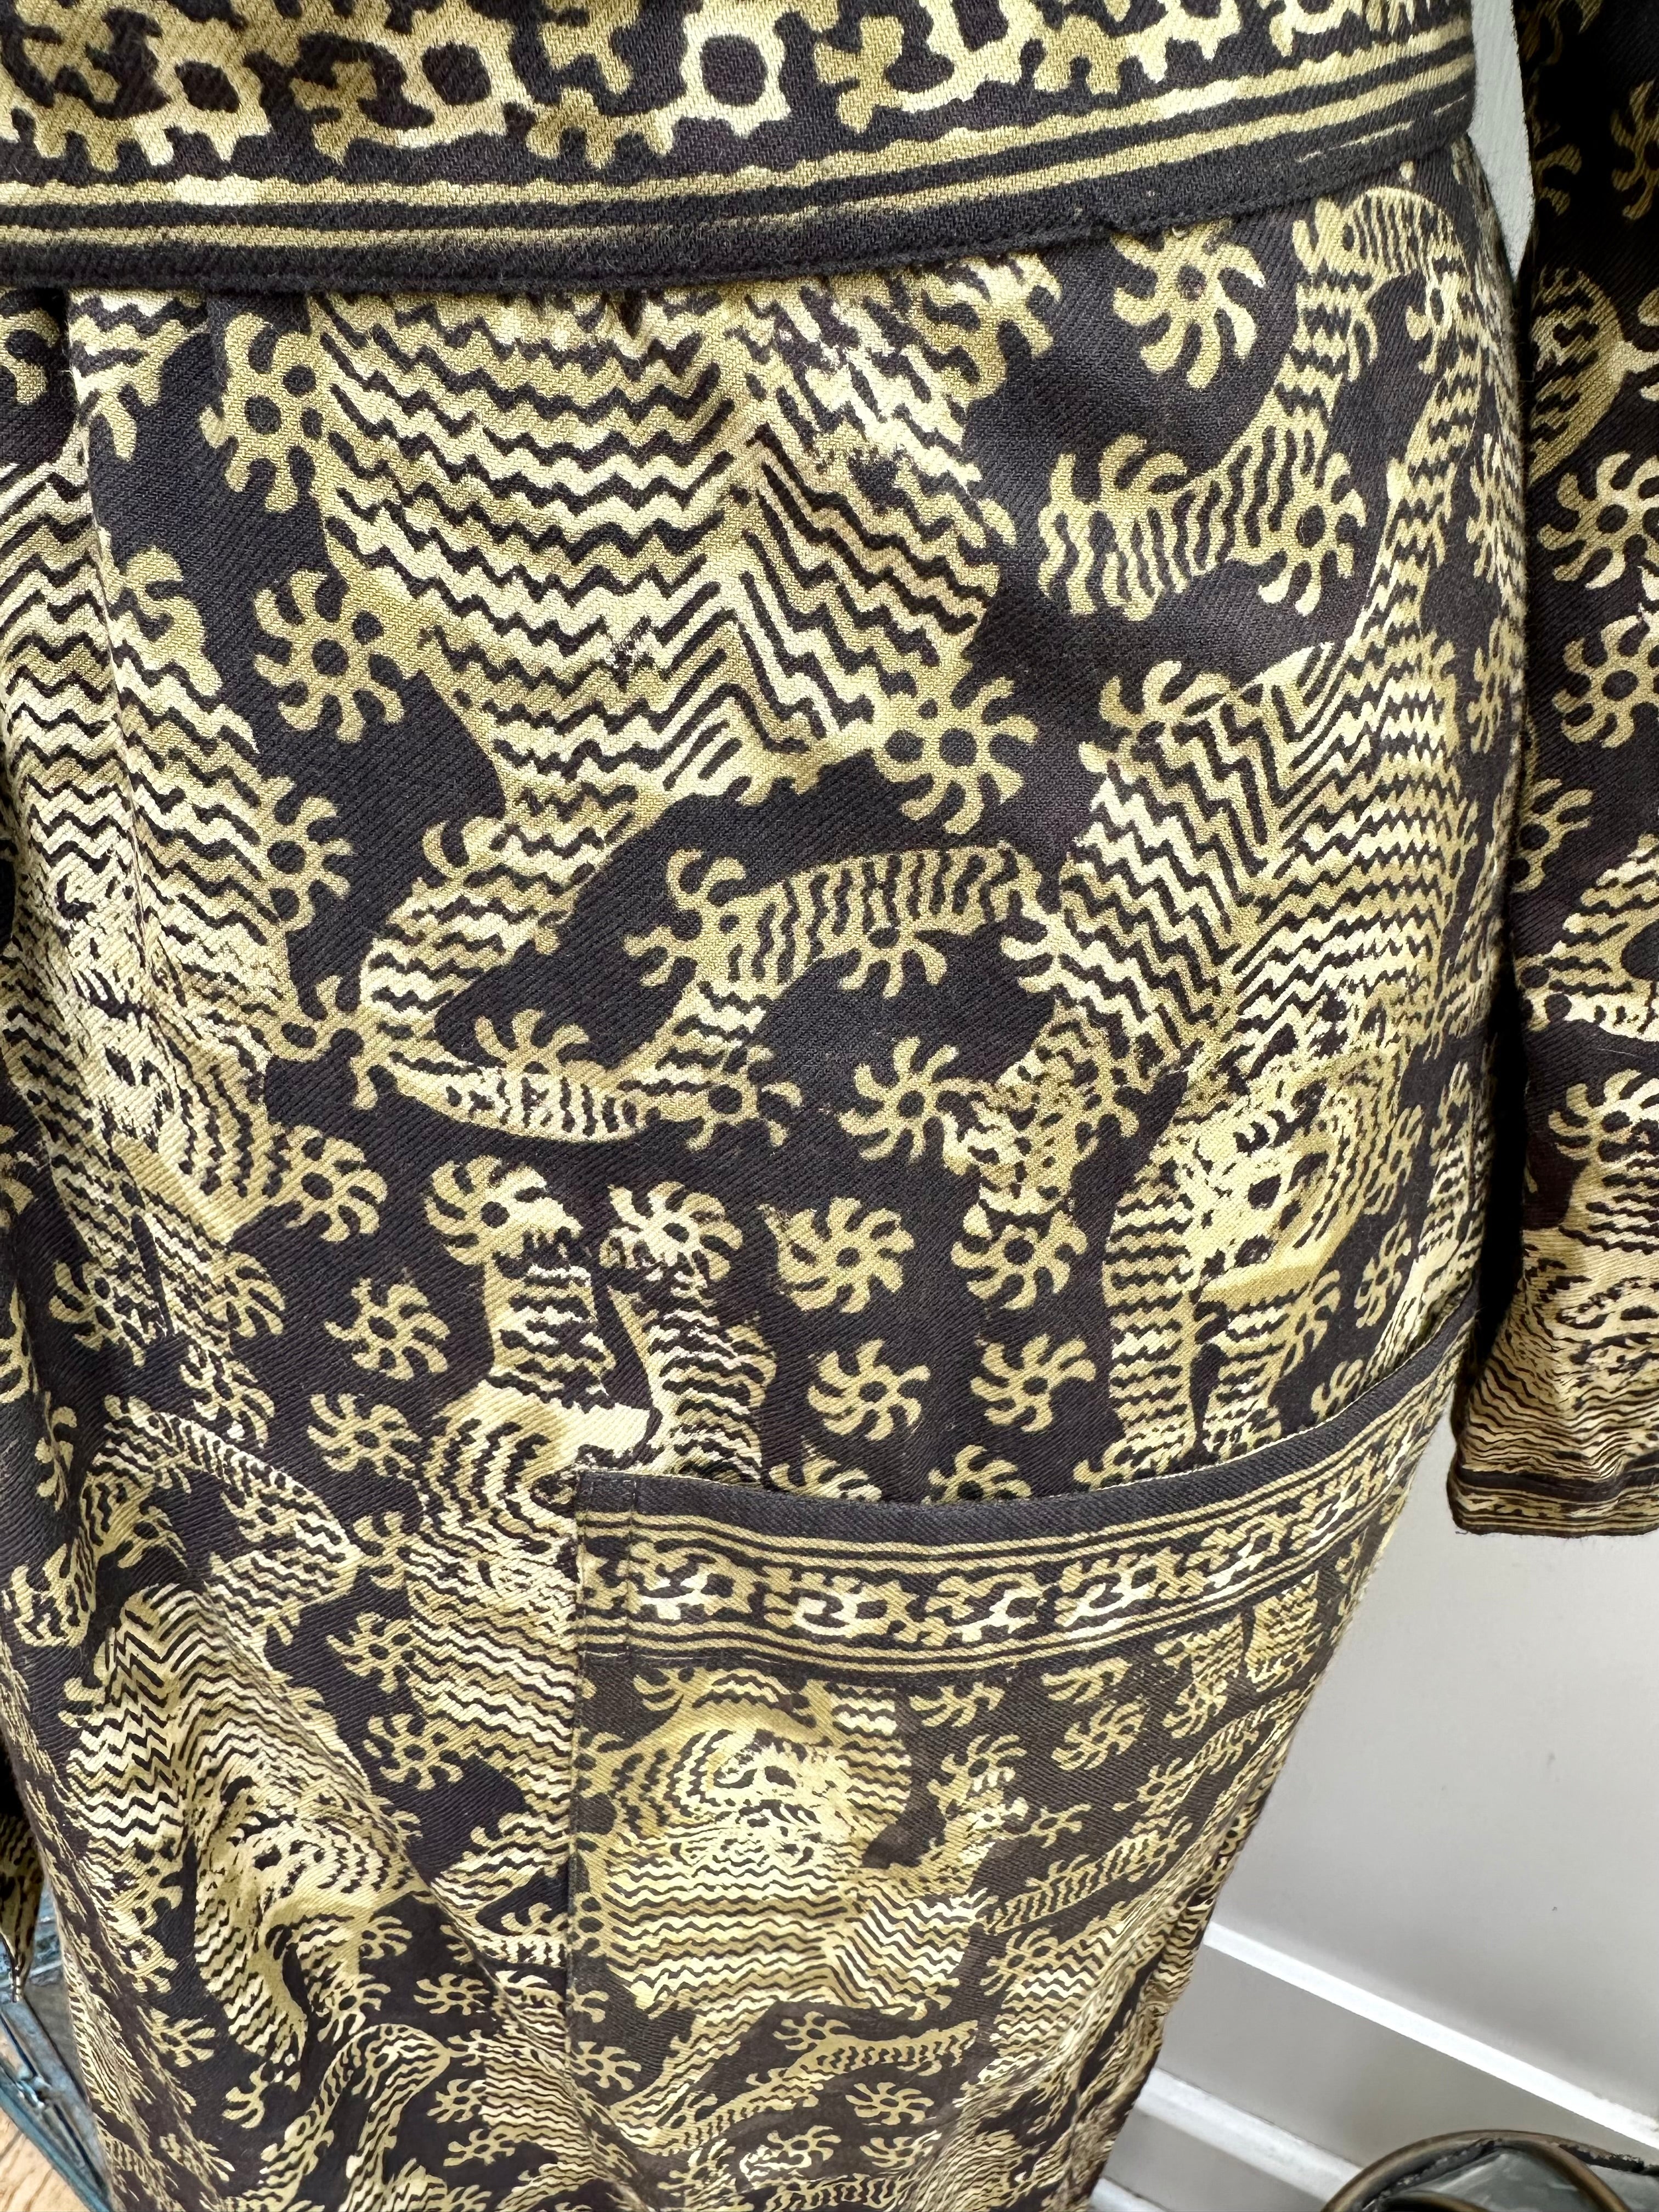 Anokhi Tiger Long Dressing Gown